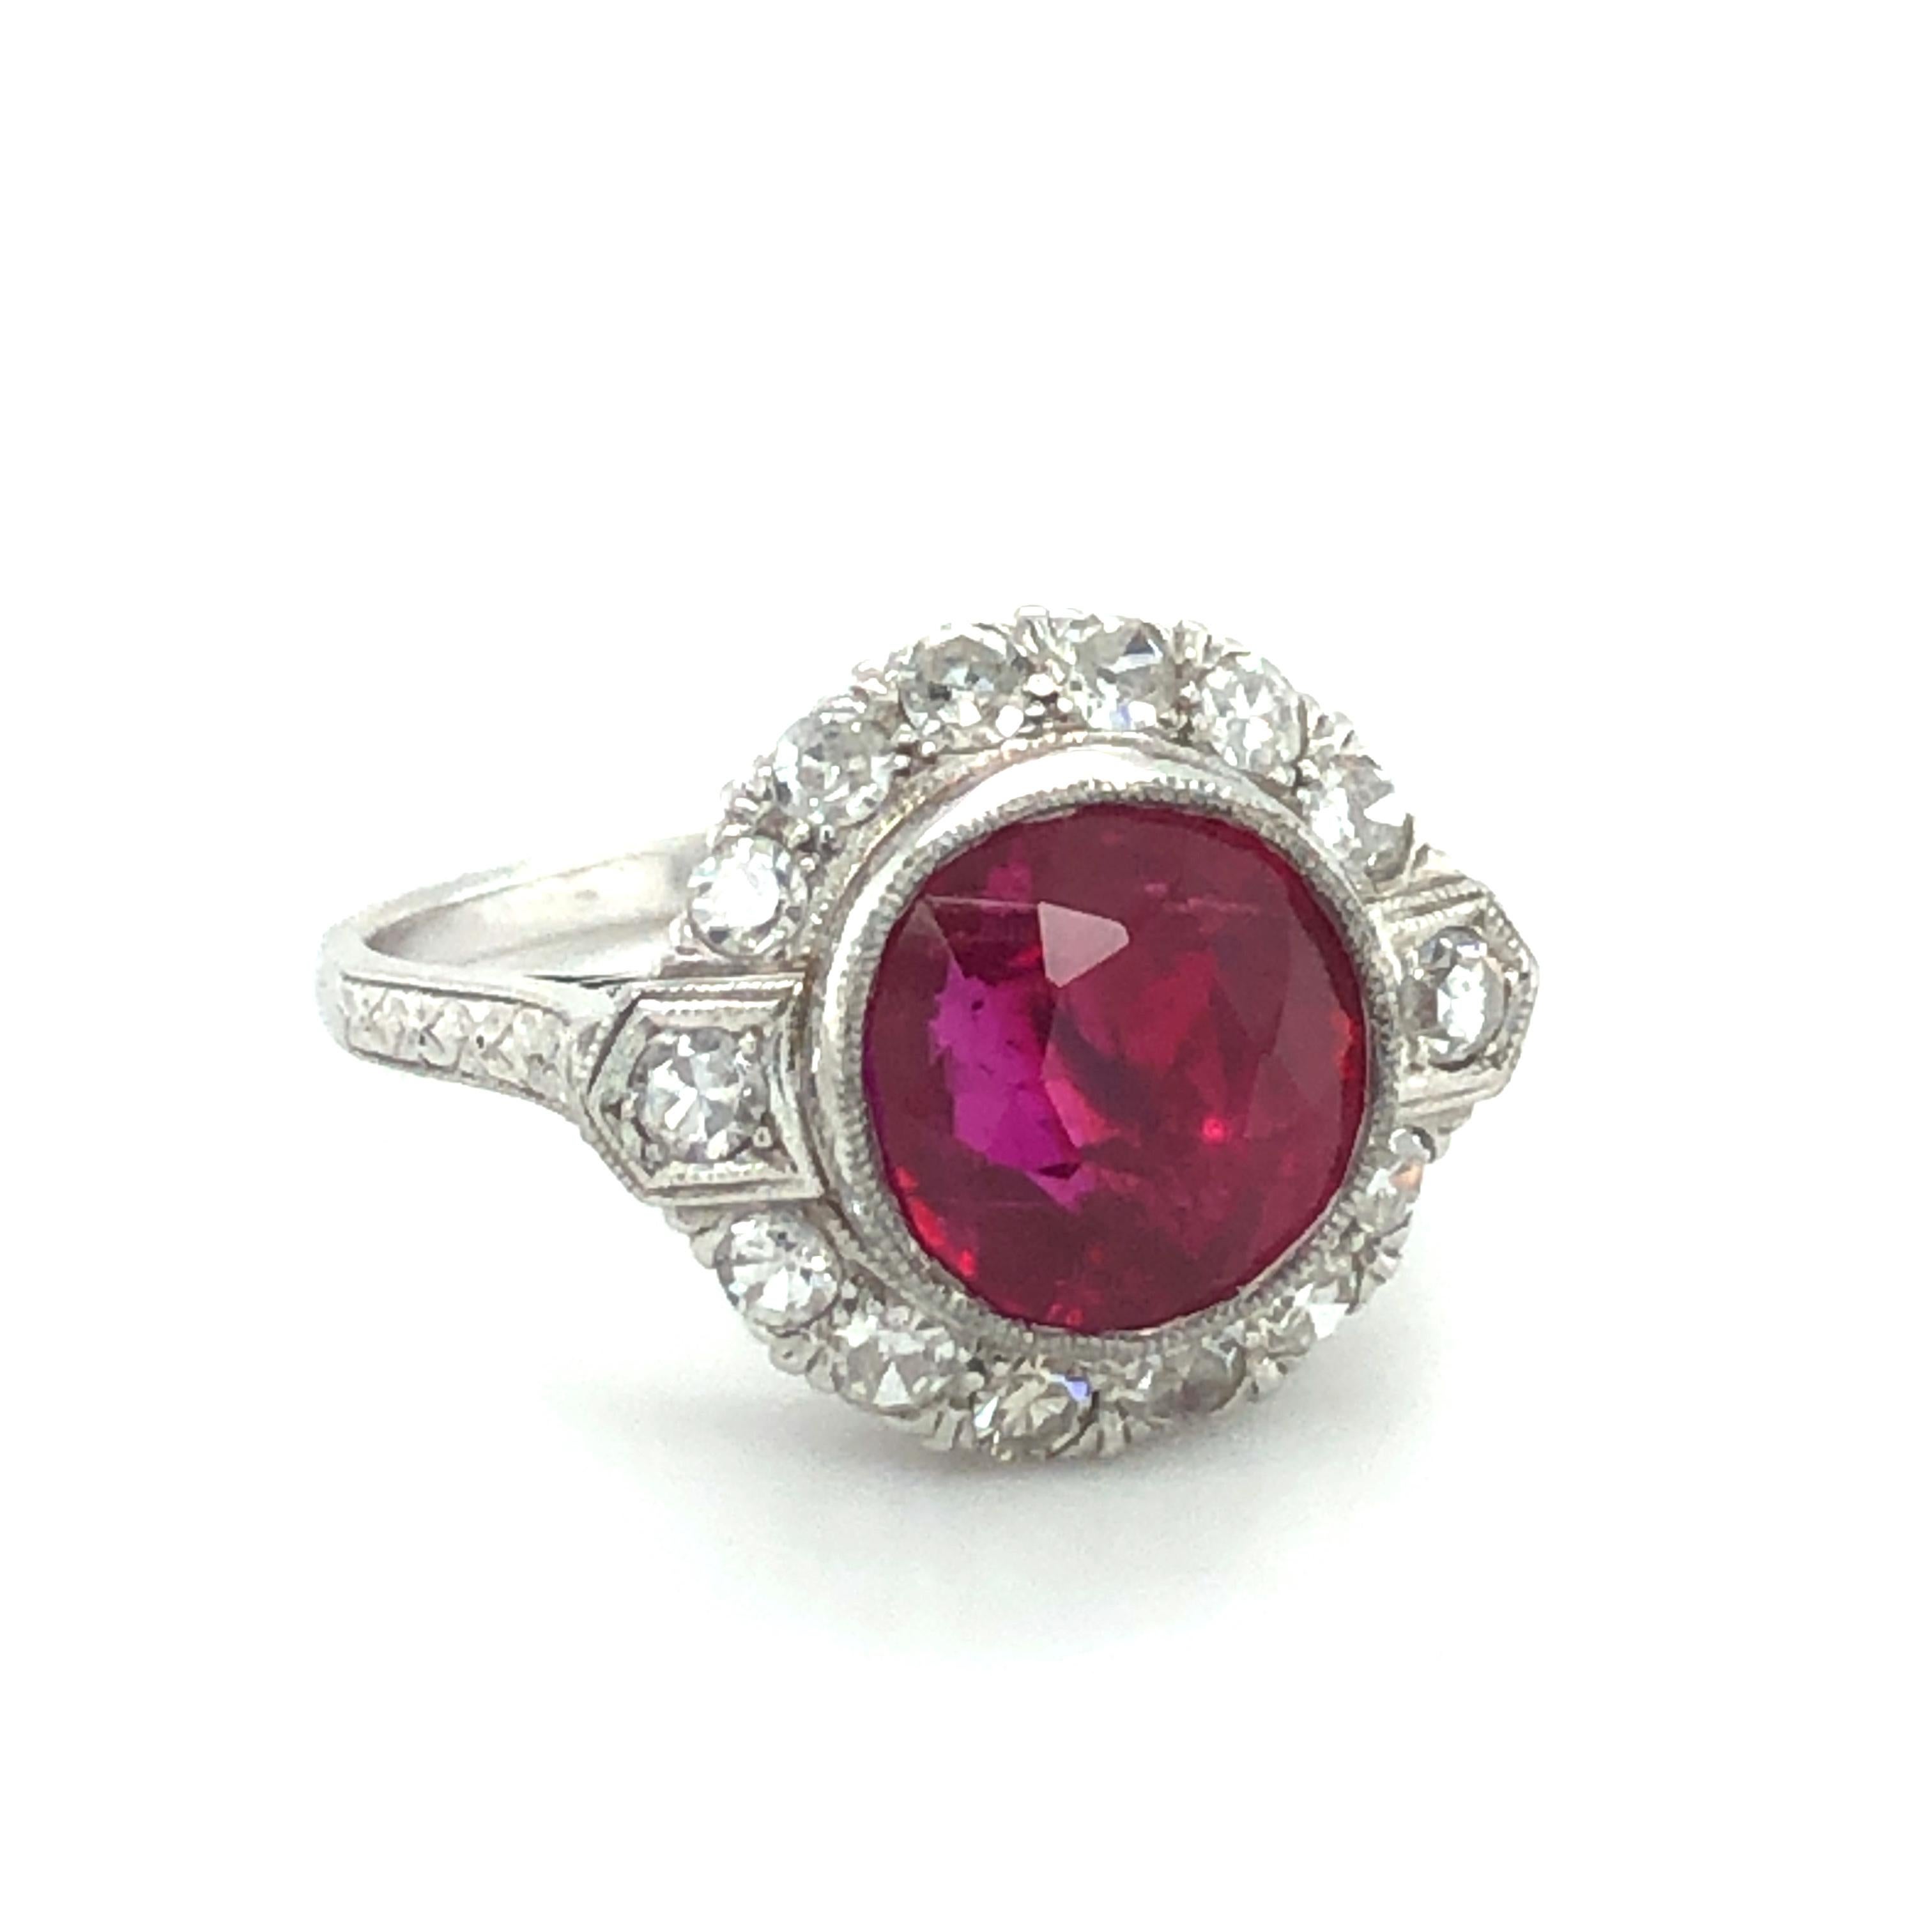 This charming Art Deco ring in platinum 950 features a stunning Burmese ruby. The cushion-shaped, untreated ruby weighs 4.41 carats and shows a beautiful red of incredible luminosity.
The delicate and elegant mounting in platinum is set with 14